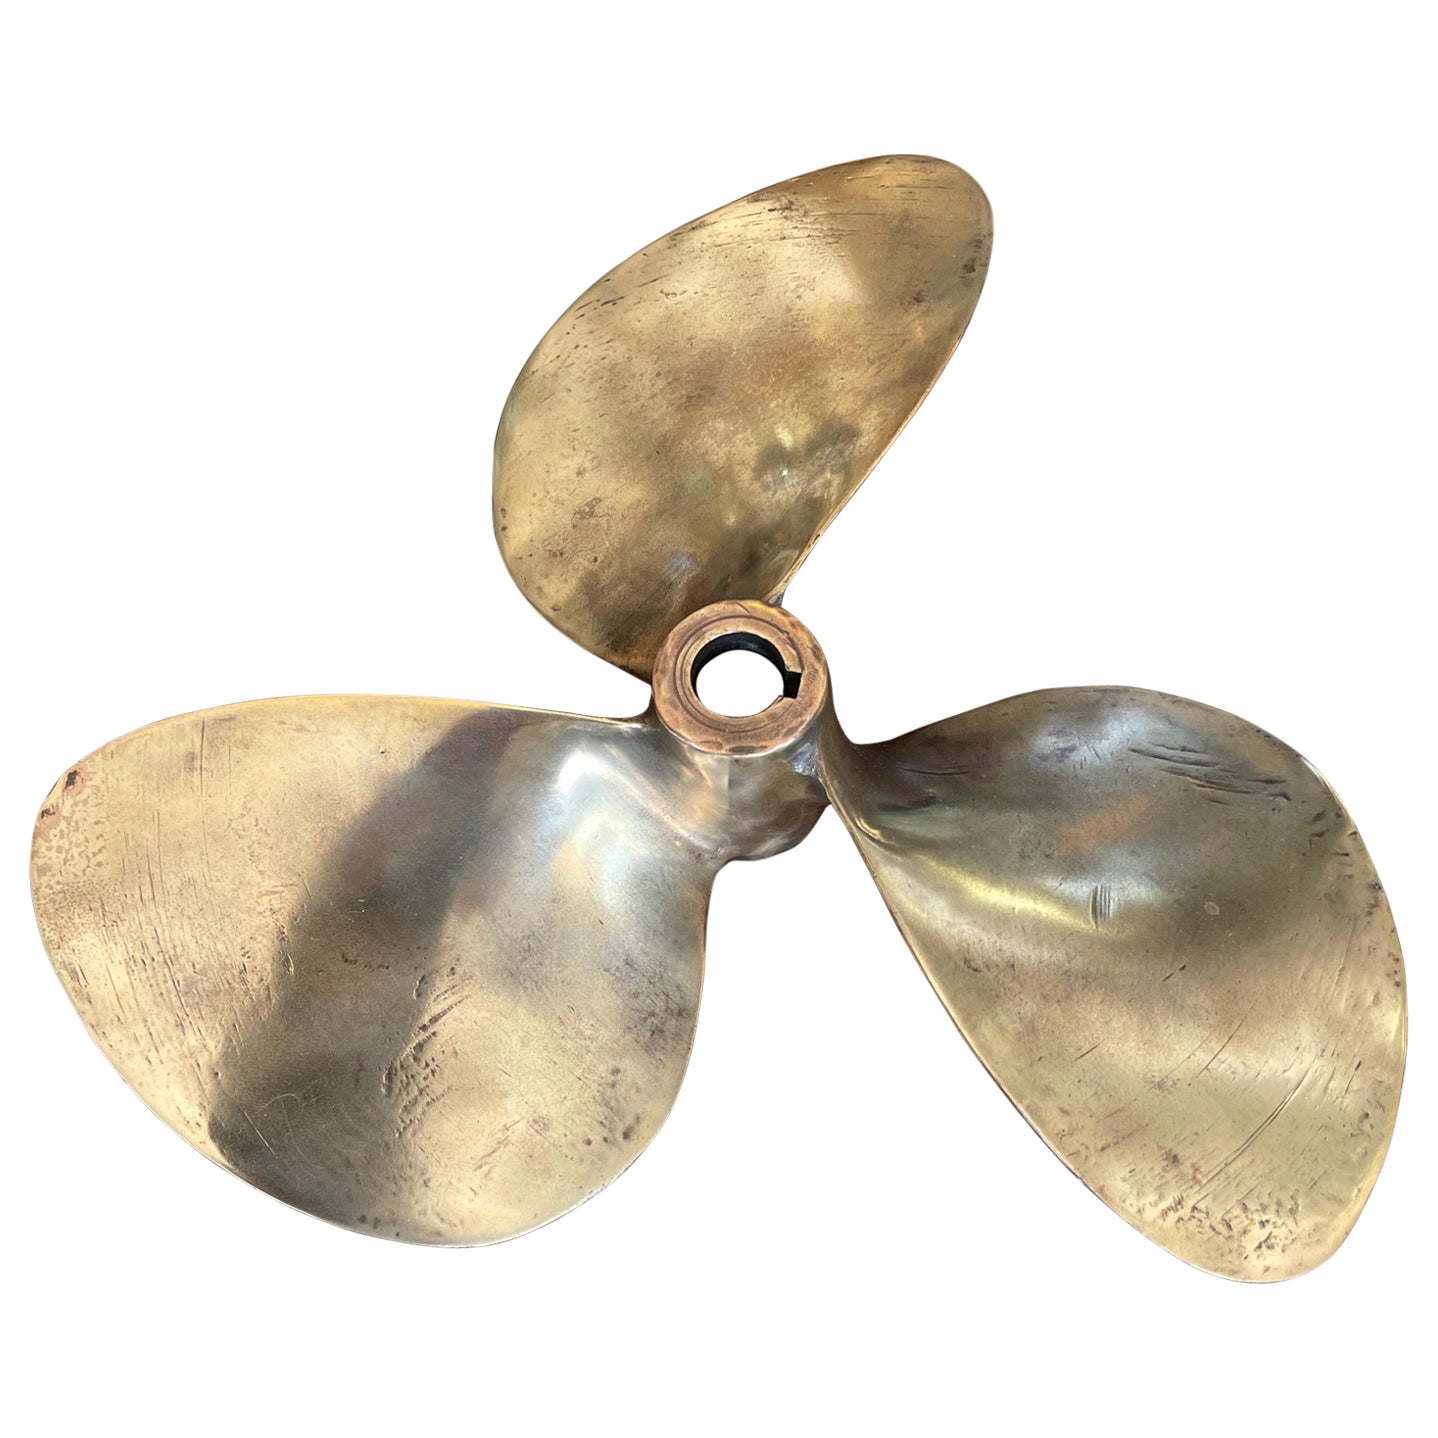 Vintage Solid Brass Propeller Paper Weight / Desk Accessory